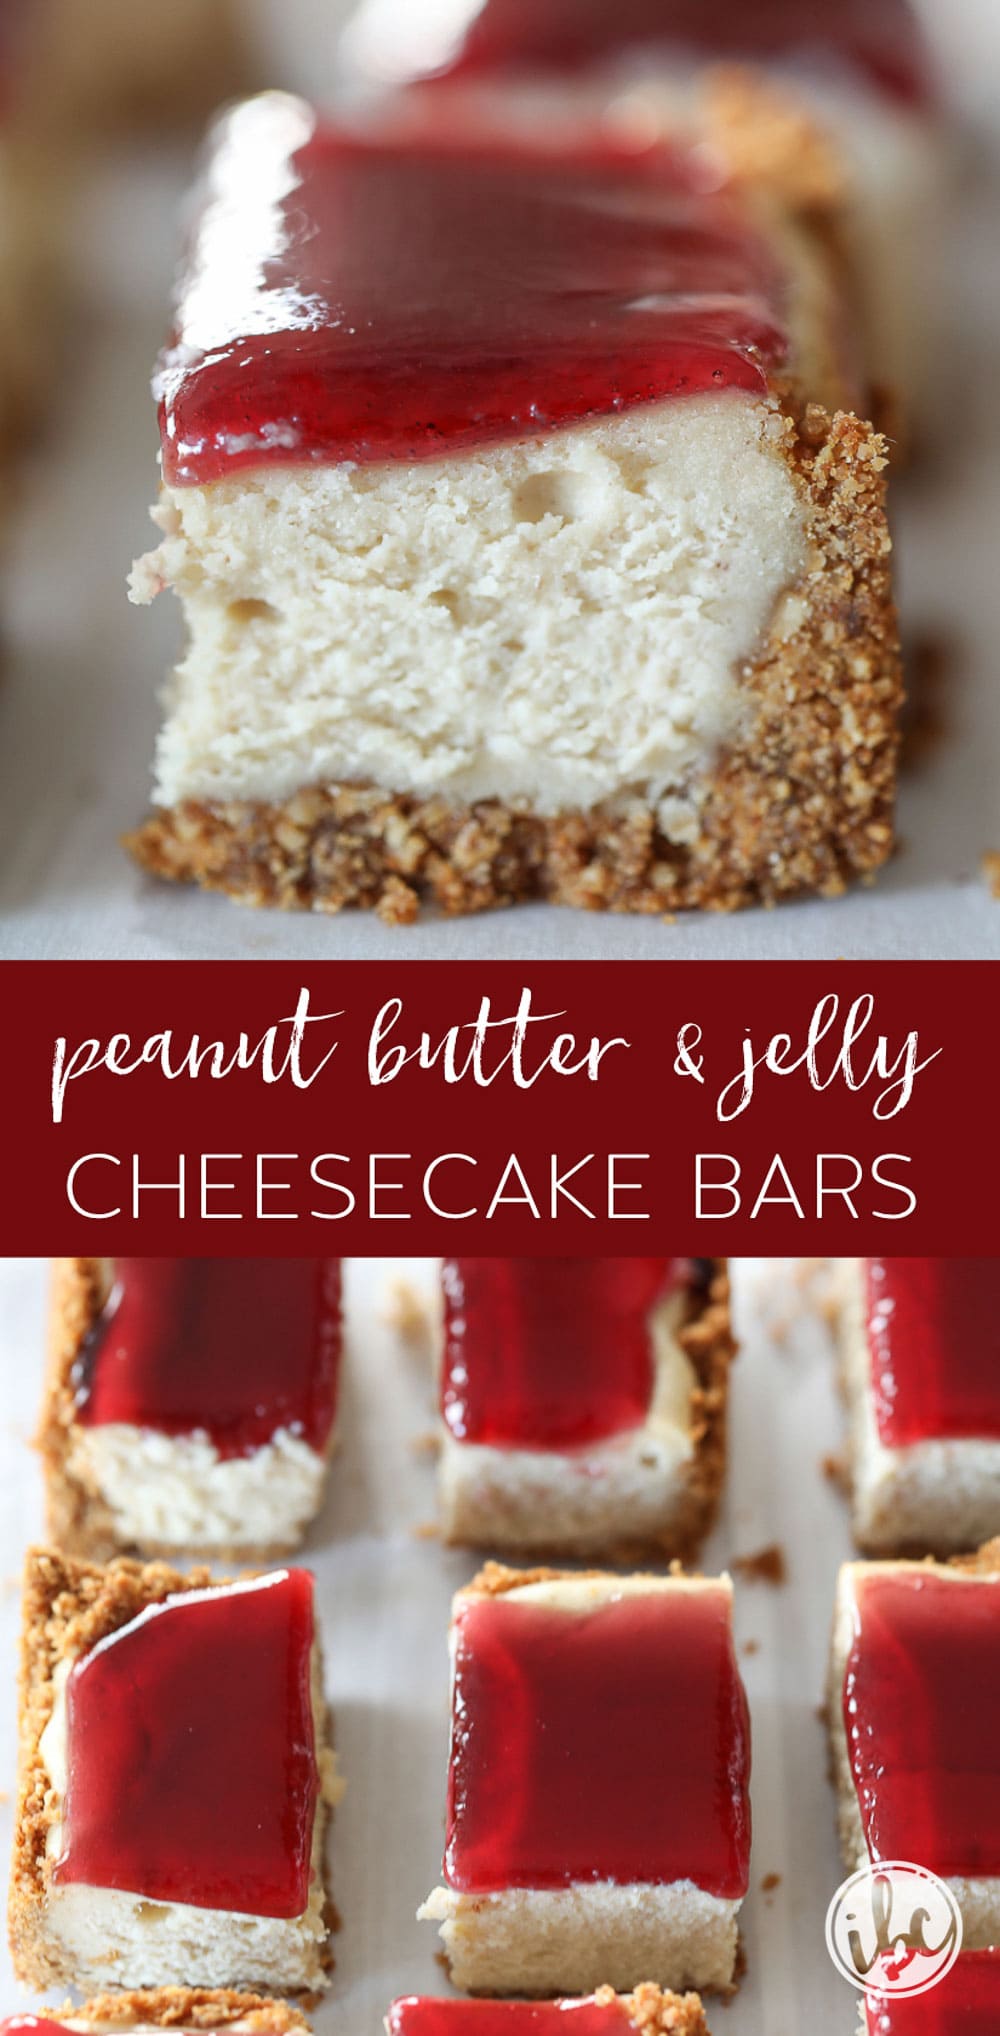 These Peanut Butter and Jelly Cheesecake Bars are a dessert everyone will love. #peantbutter #jelly #cheesecake #bars #dessert #recipe